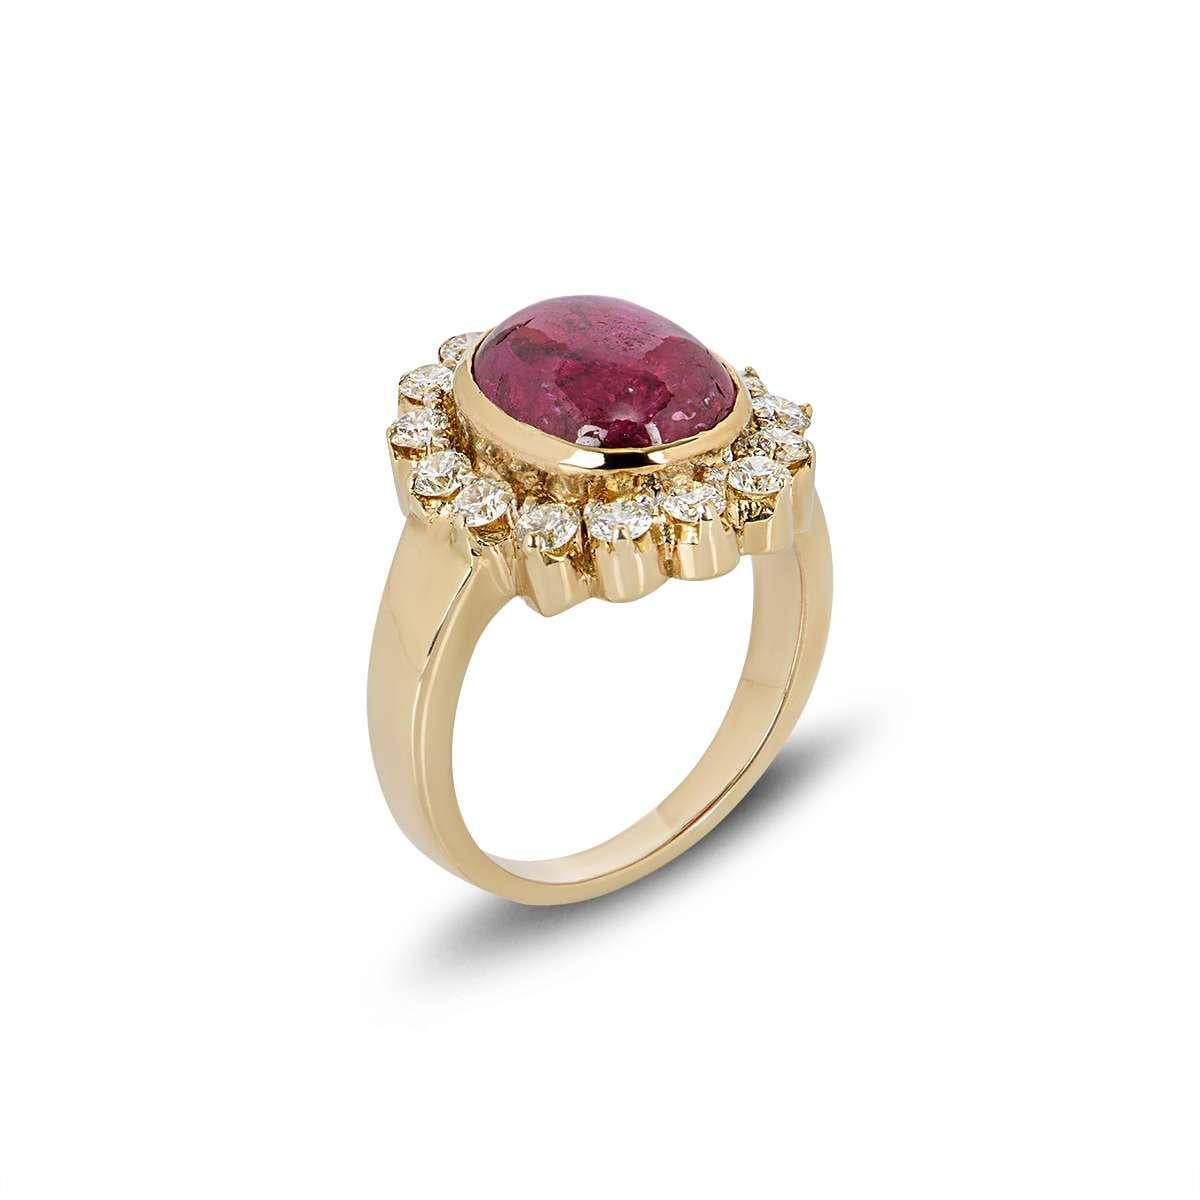 A beautiful 18k yellow gold diamond and natural ruby cluster ring. The ring is set to the centre with an oval ruby in a rubover setting weighing 5.03ct. Accentuating the central stone are 15 round brilliant cut diamonds in a cluster setting with a